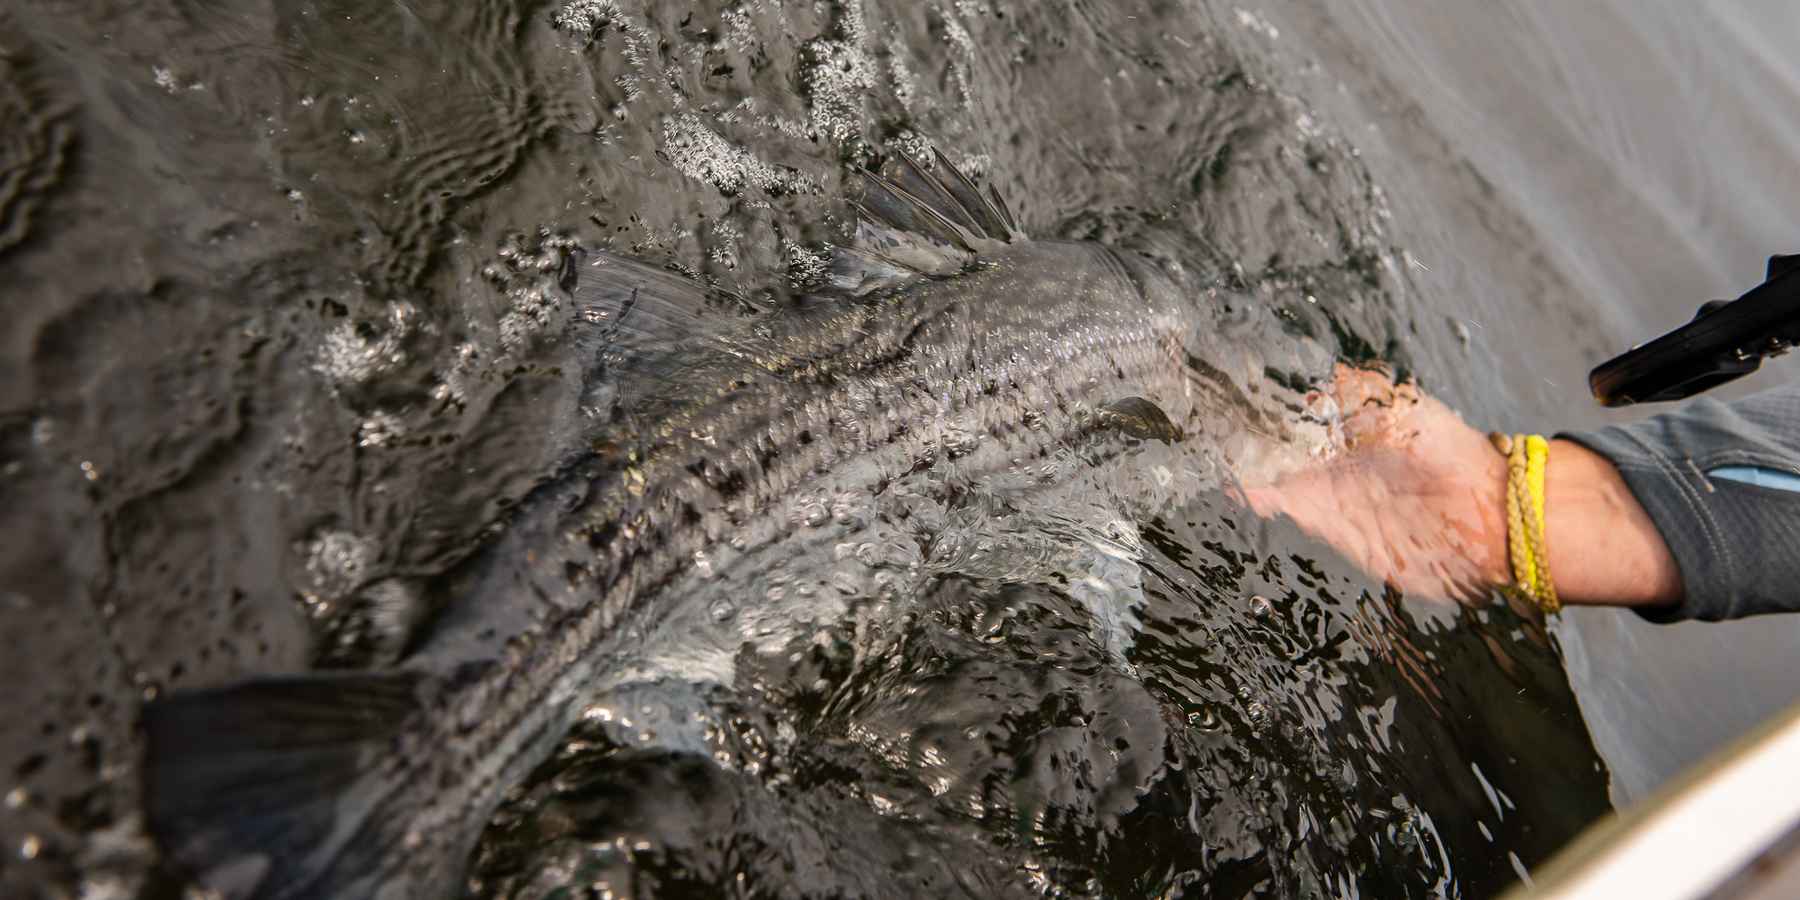 Changes are coming to striped bass management, make your voice heard | Hatch Magazine